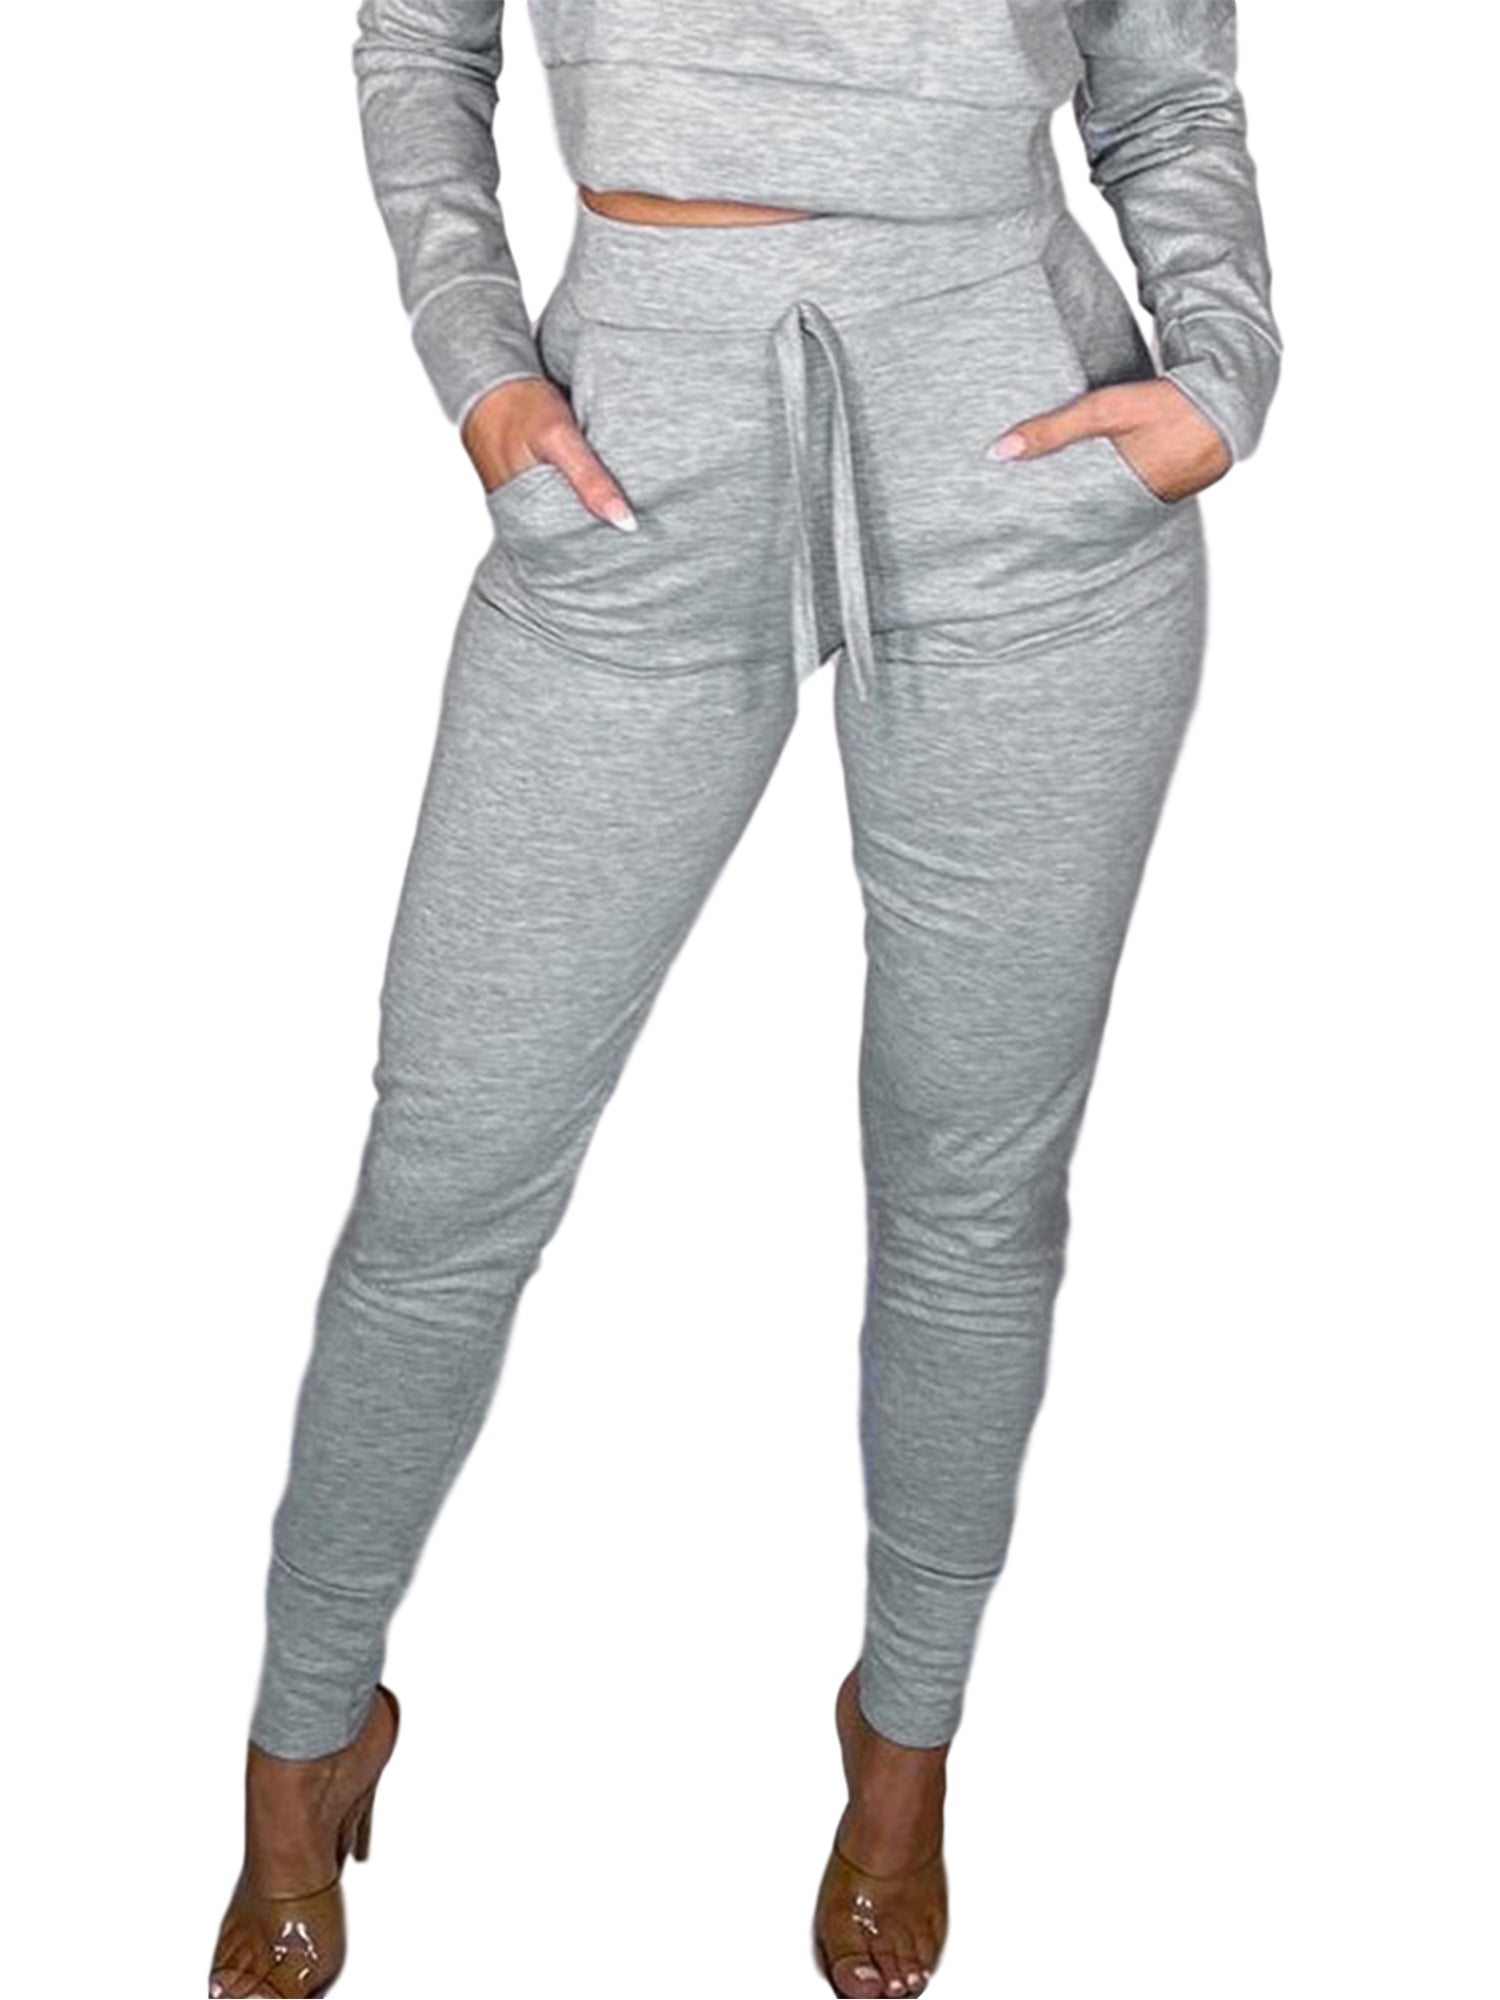 Springcmy Women Jogger Casual Elastic Waist Ankle Cuff Tight Sweatpants